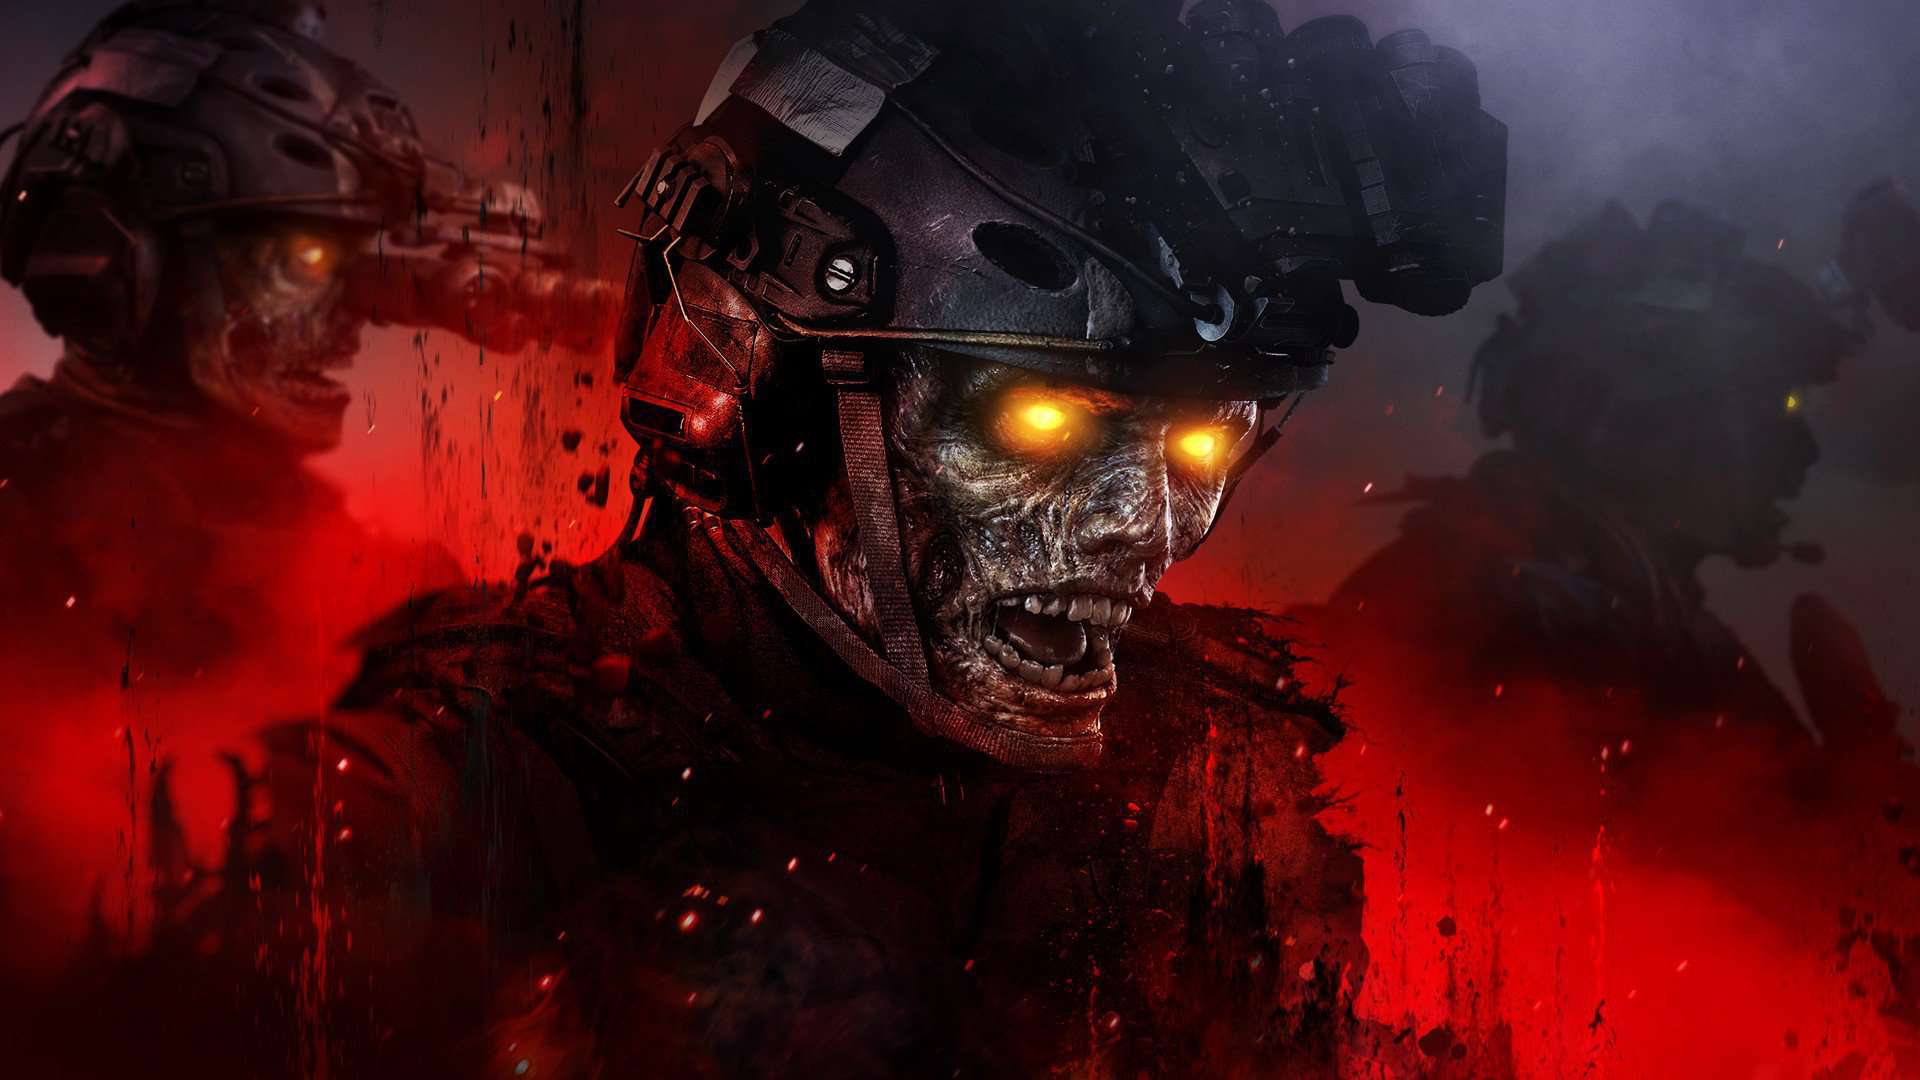 Zombie soldier in MW3 Zombies